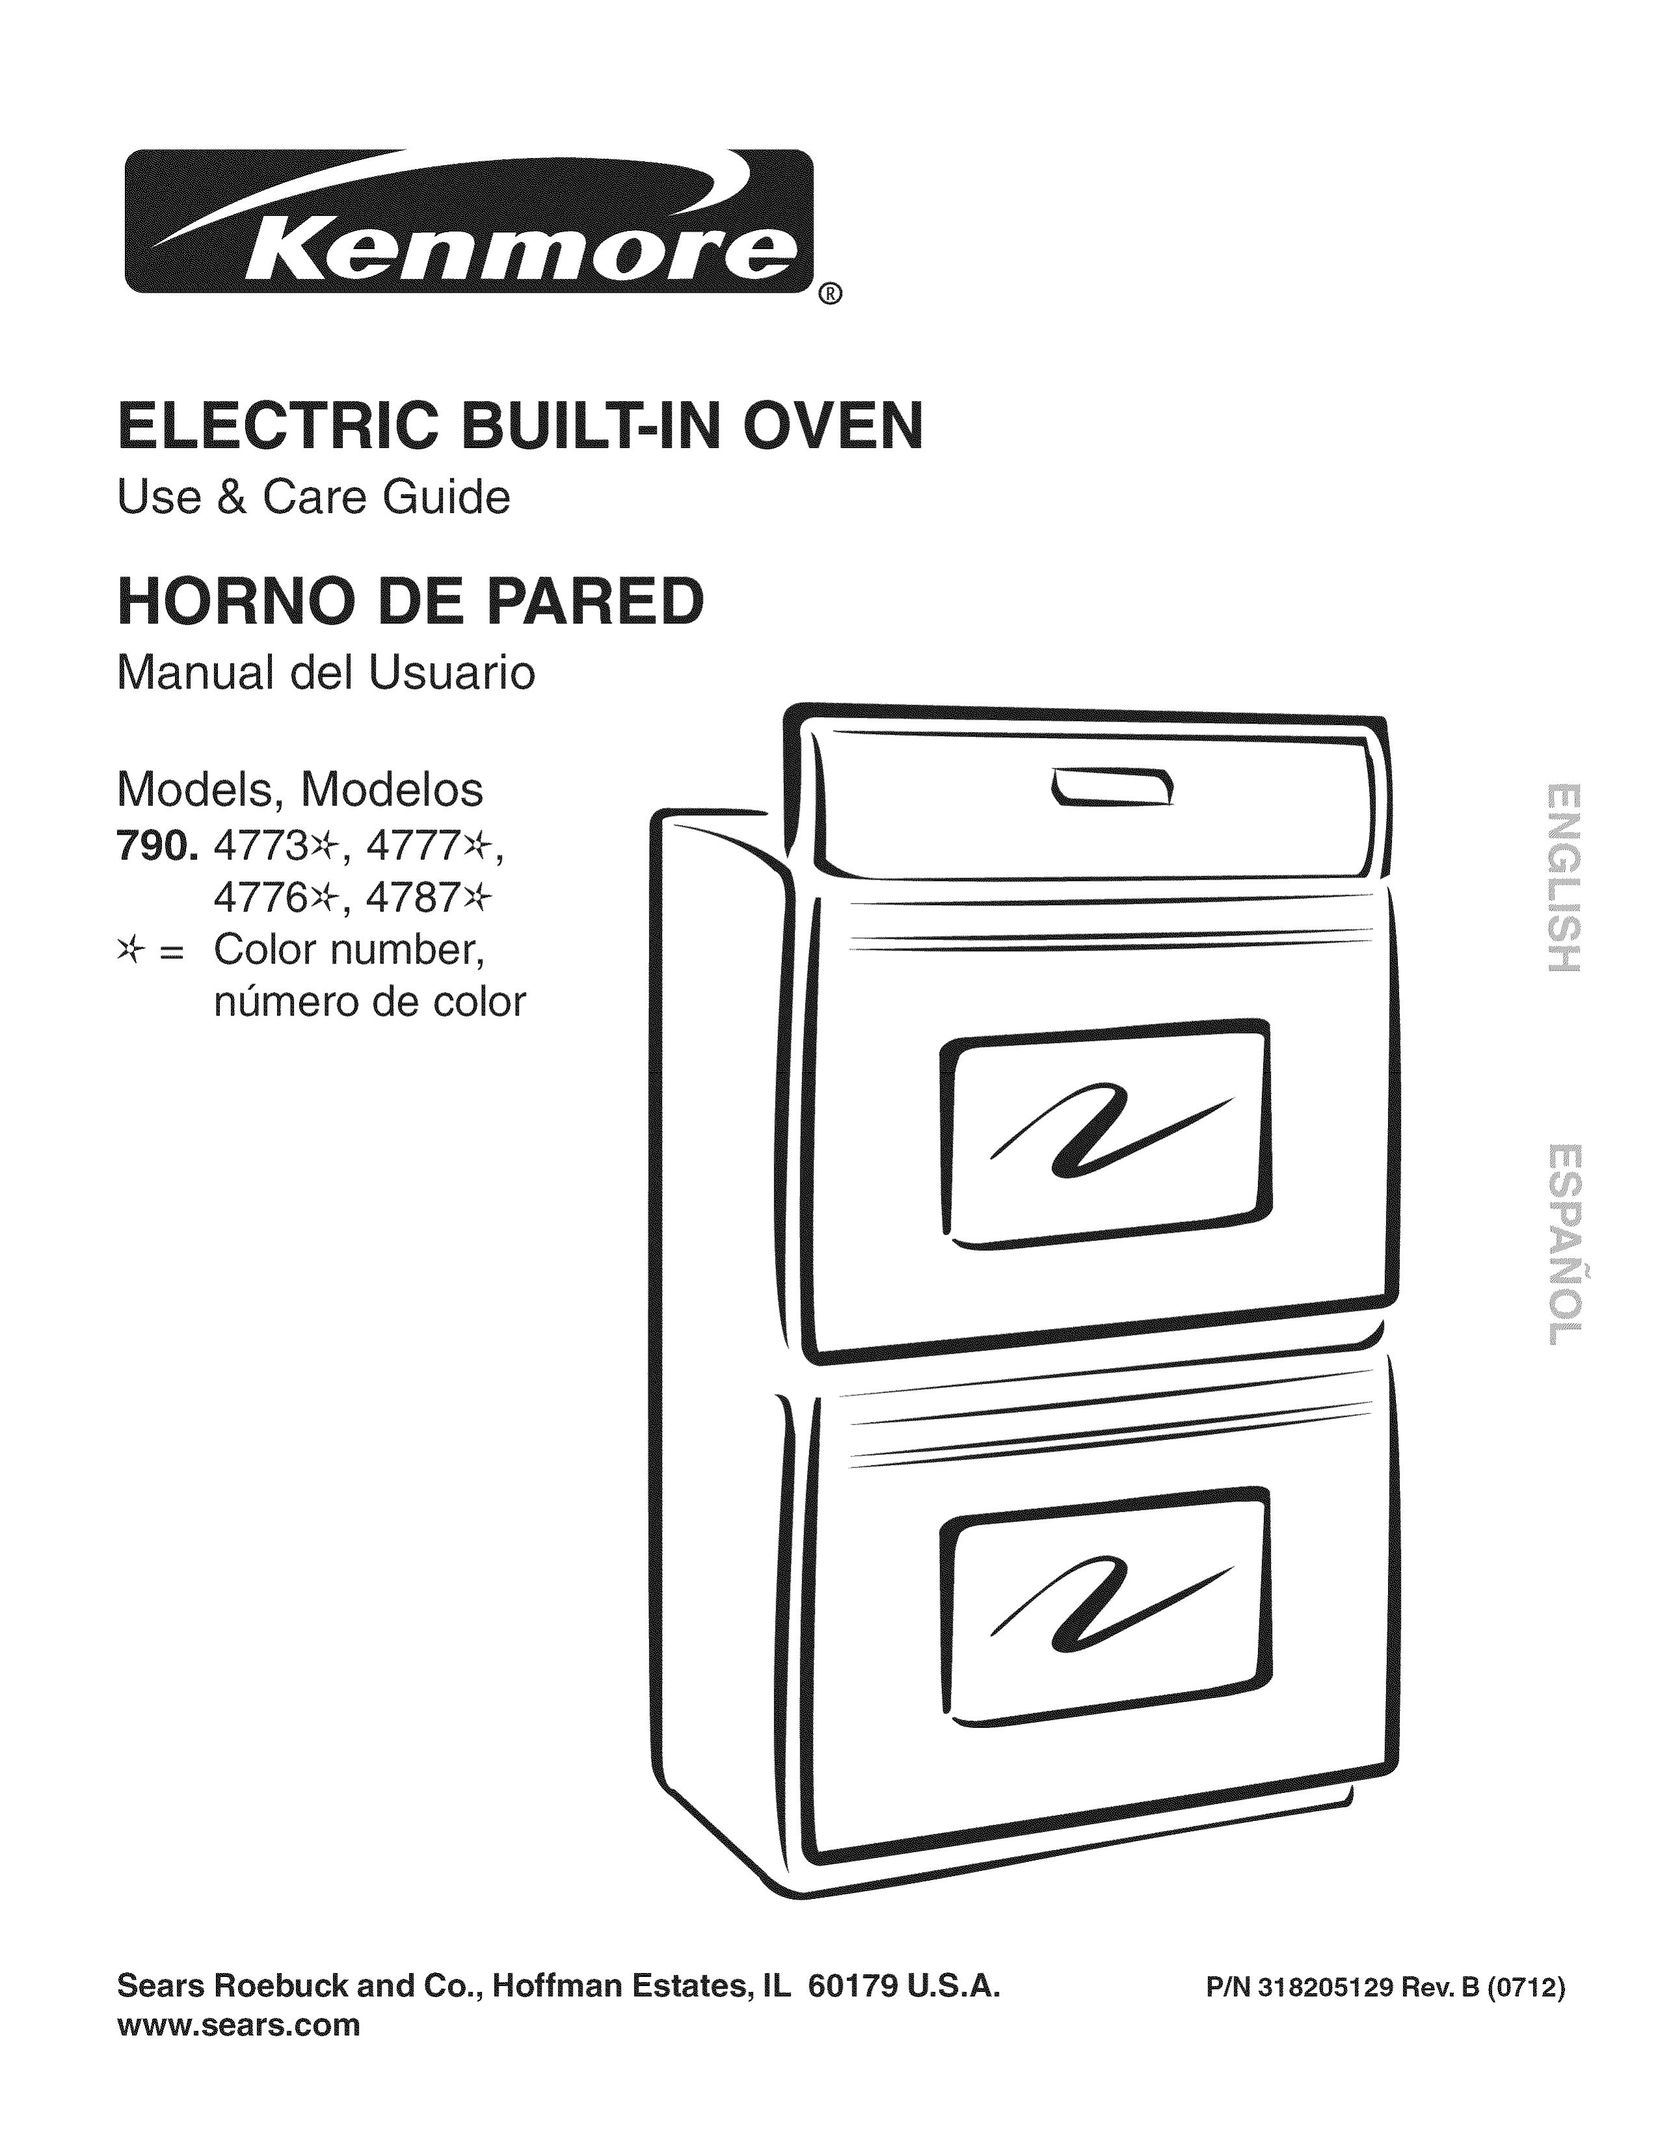 Kenmore 790.4776 Convection Oven User Manual